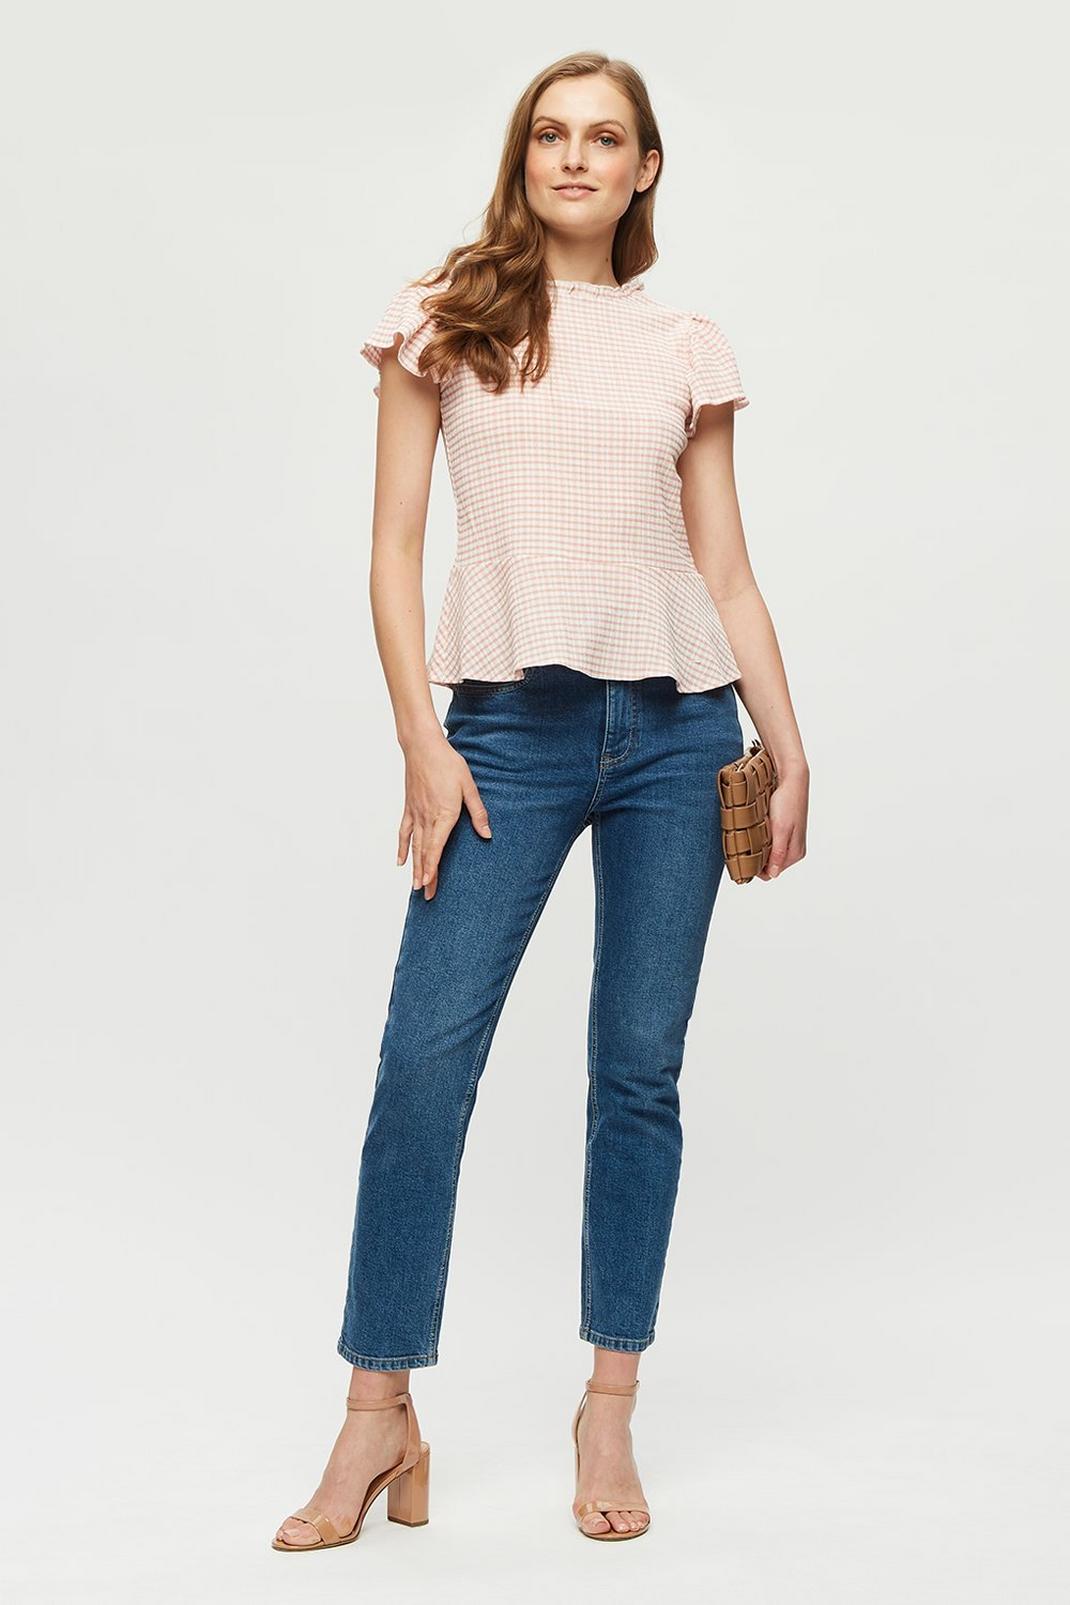 563 Blush Gingham Textured Frill Top image number 2